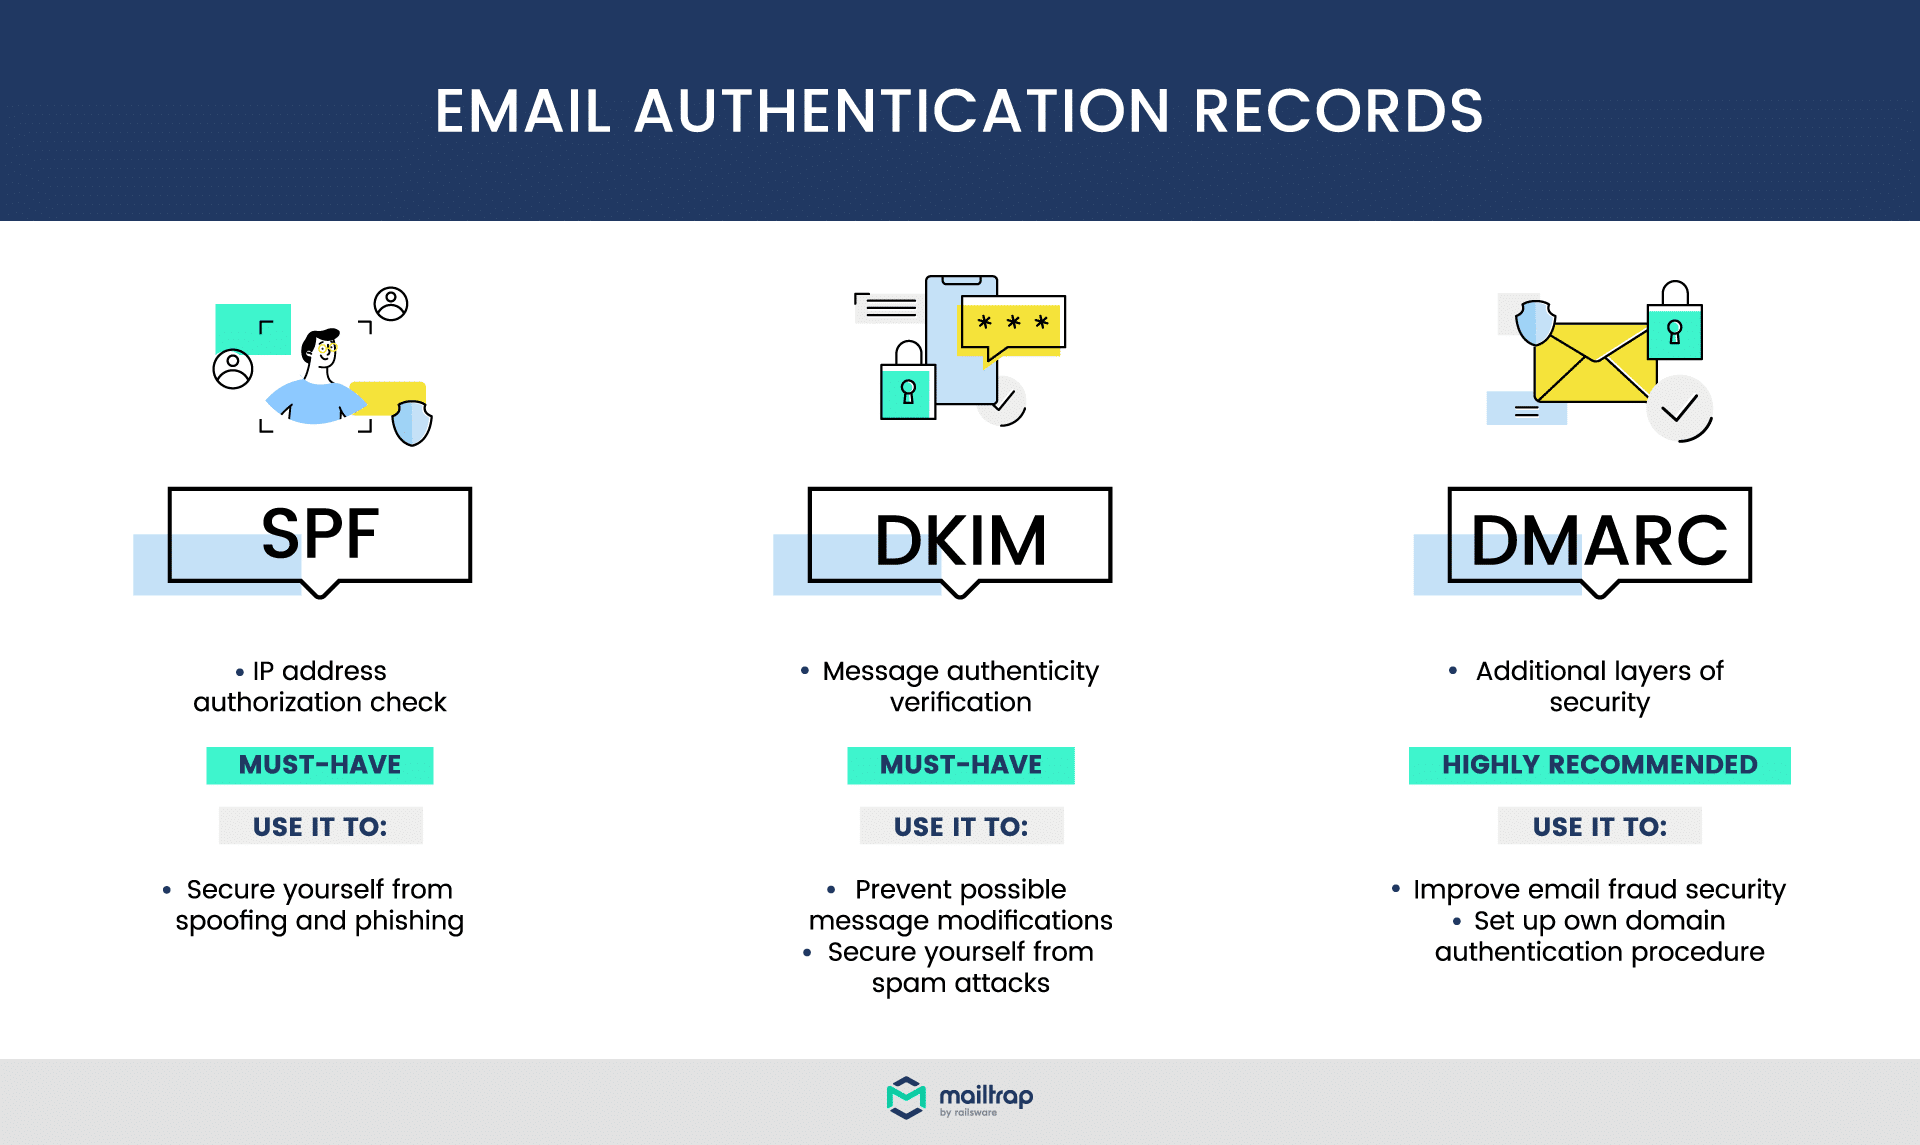 The breakdown of email authentication records: SPF, DKIM and DMARC with brief descriptions